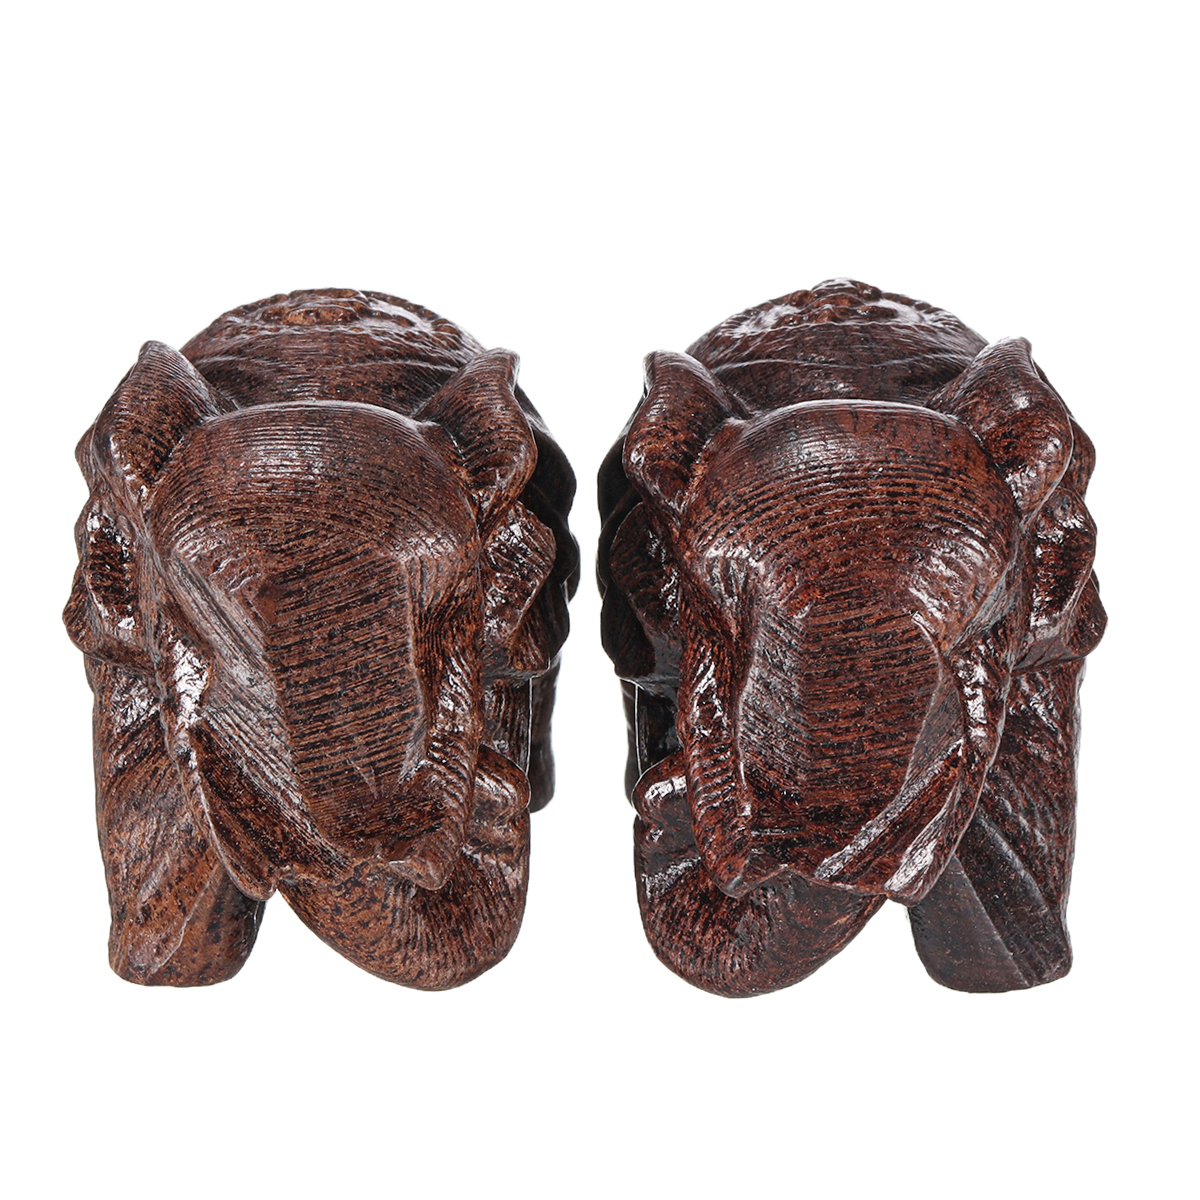 1-Pair-Natural-Agarwood-Elephant-Wood-Carving-Wood-Crafts-Retro-Decoration-Craft-Creative-Gifts-Home-1759099-7